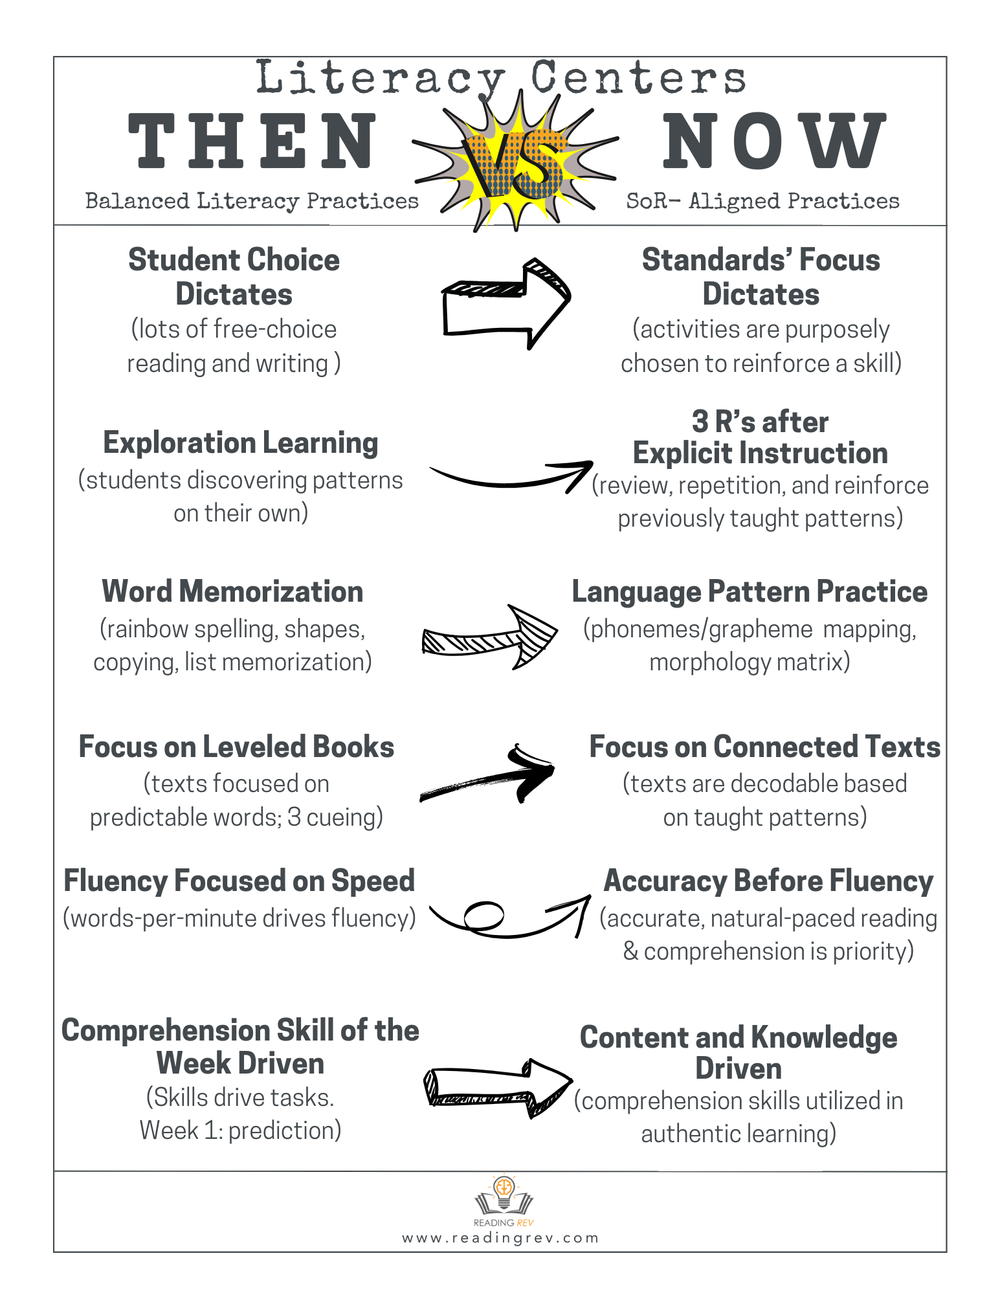 Literacy Centers Then vs. Now .png